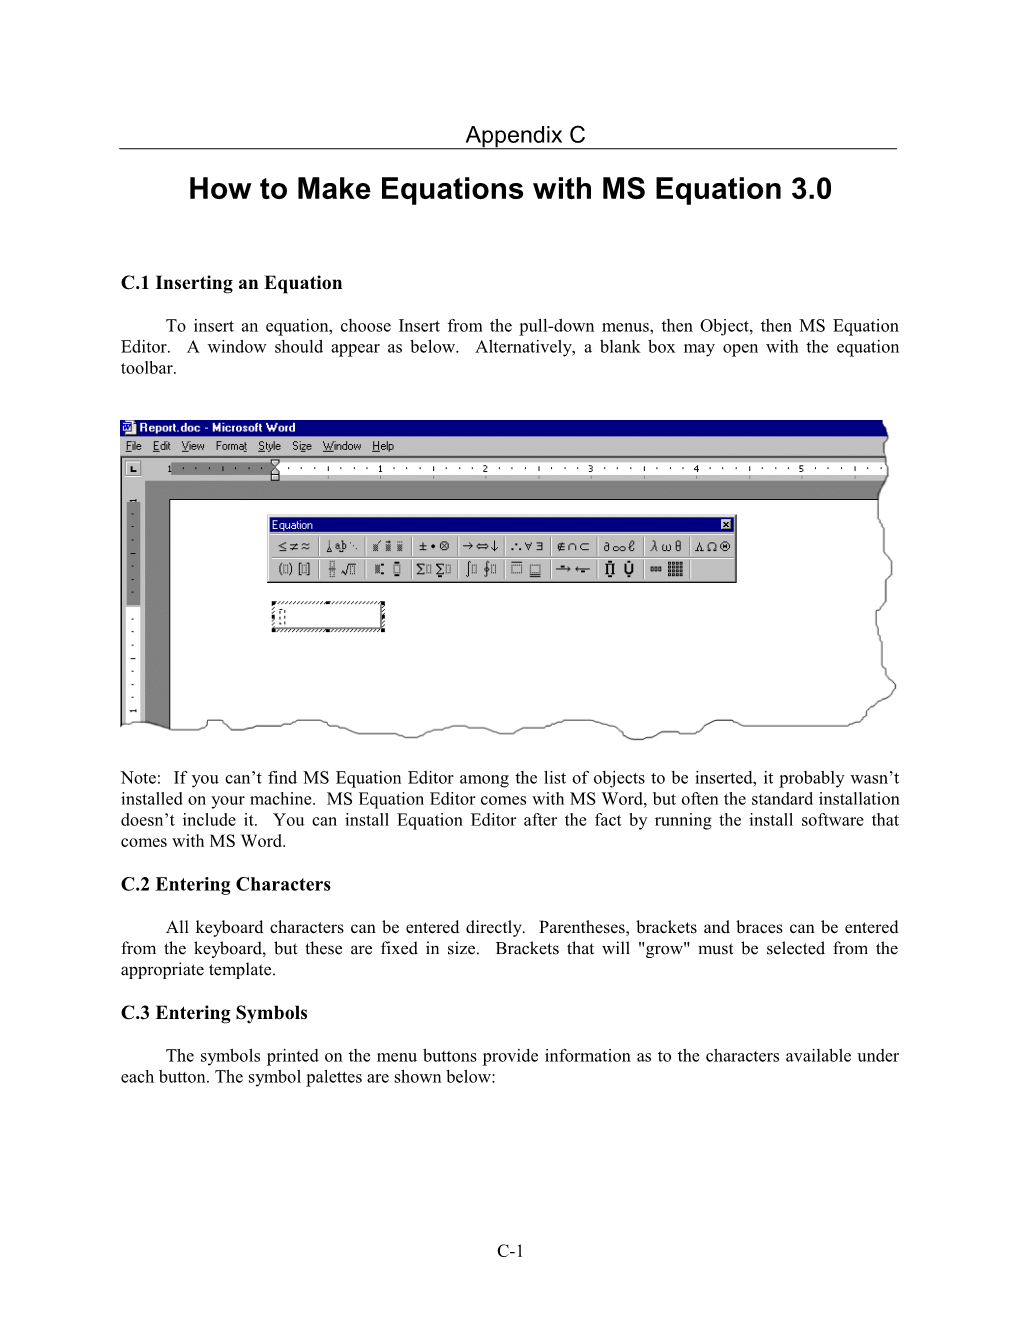 How to Make Equations with MS Equation 3.0